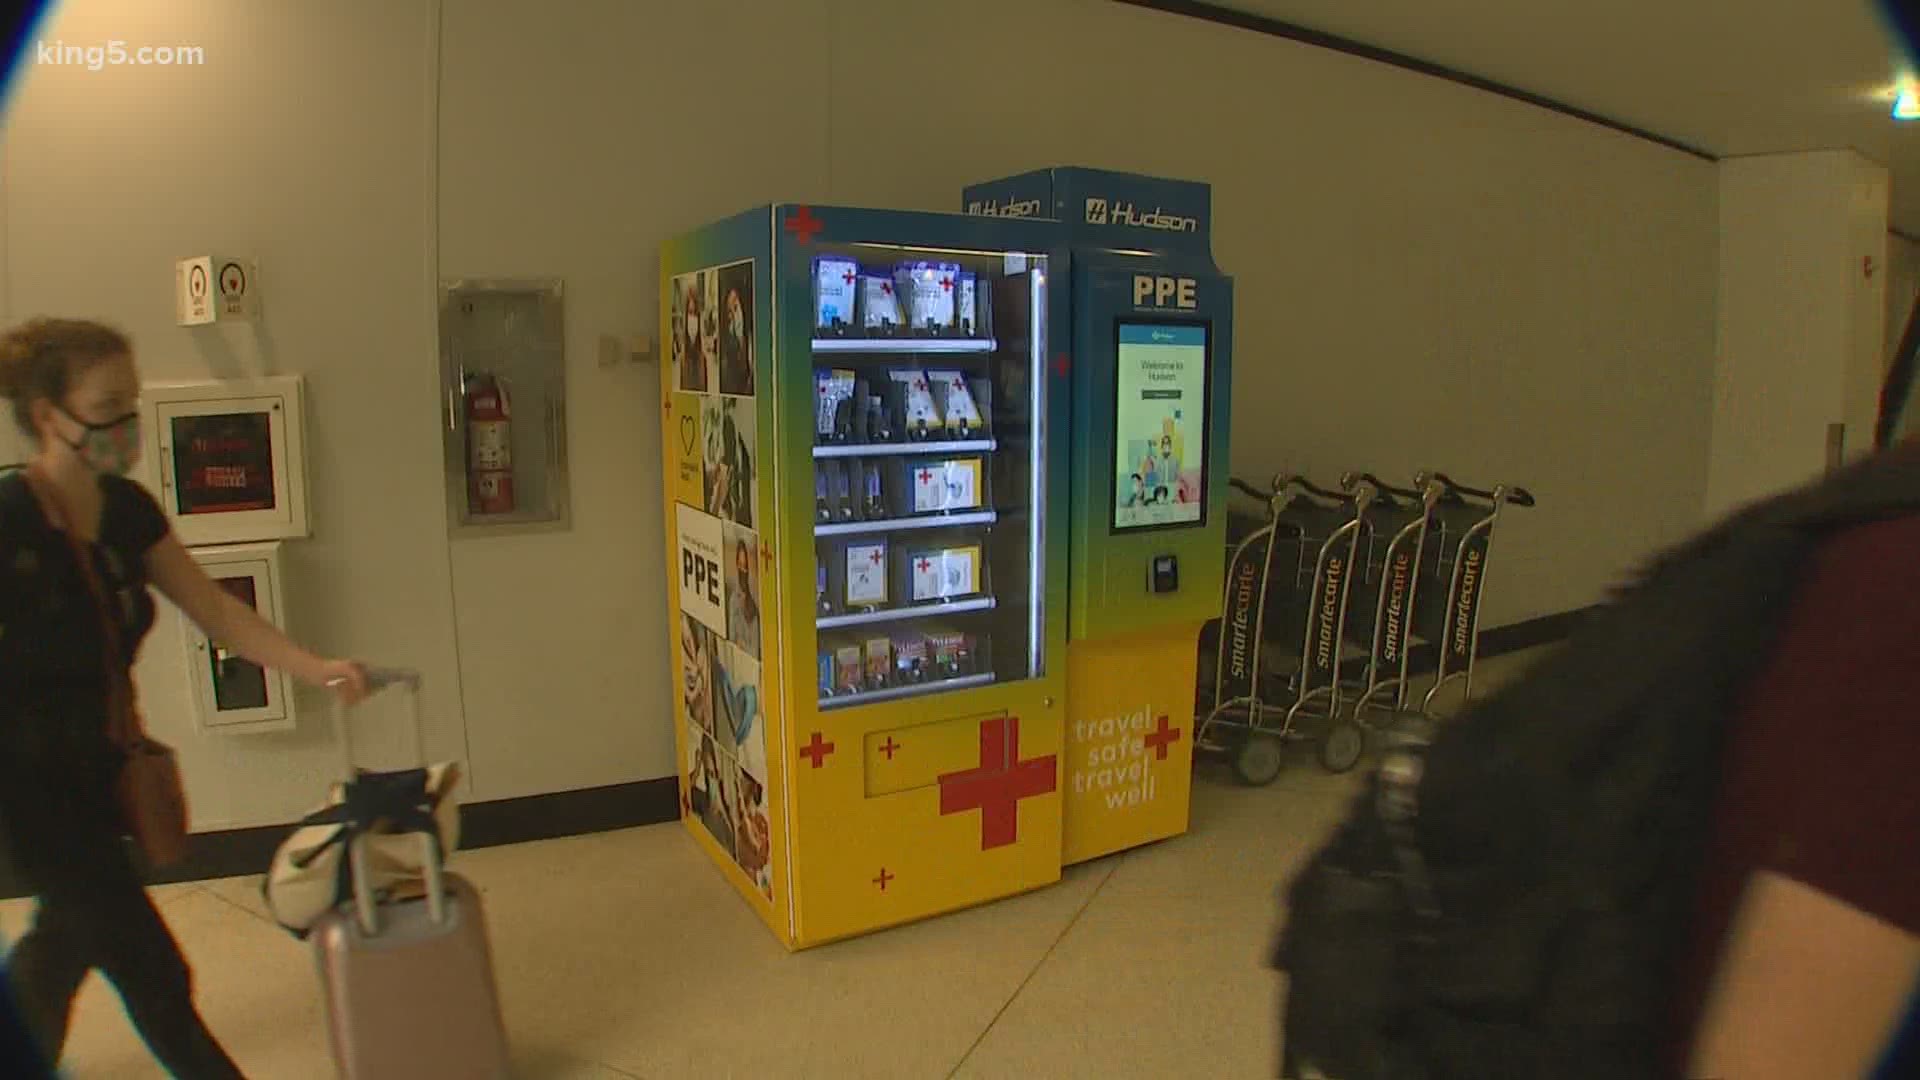 The first passenger temperature checks at Sea-Tac Airport start Tuesday. On Friday, the airport set up mask vending machines, and passengers are offered free masks.